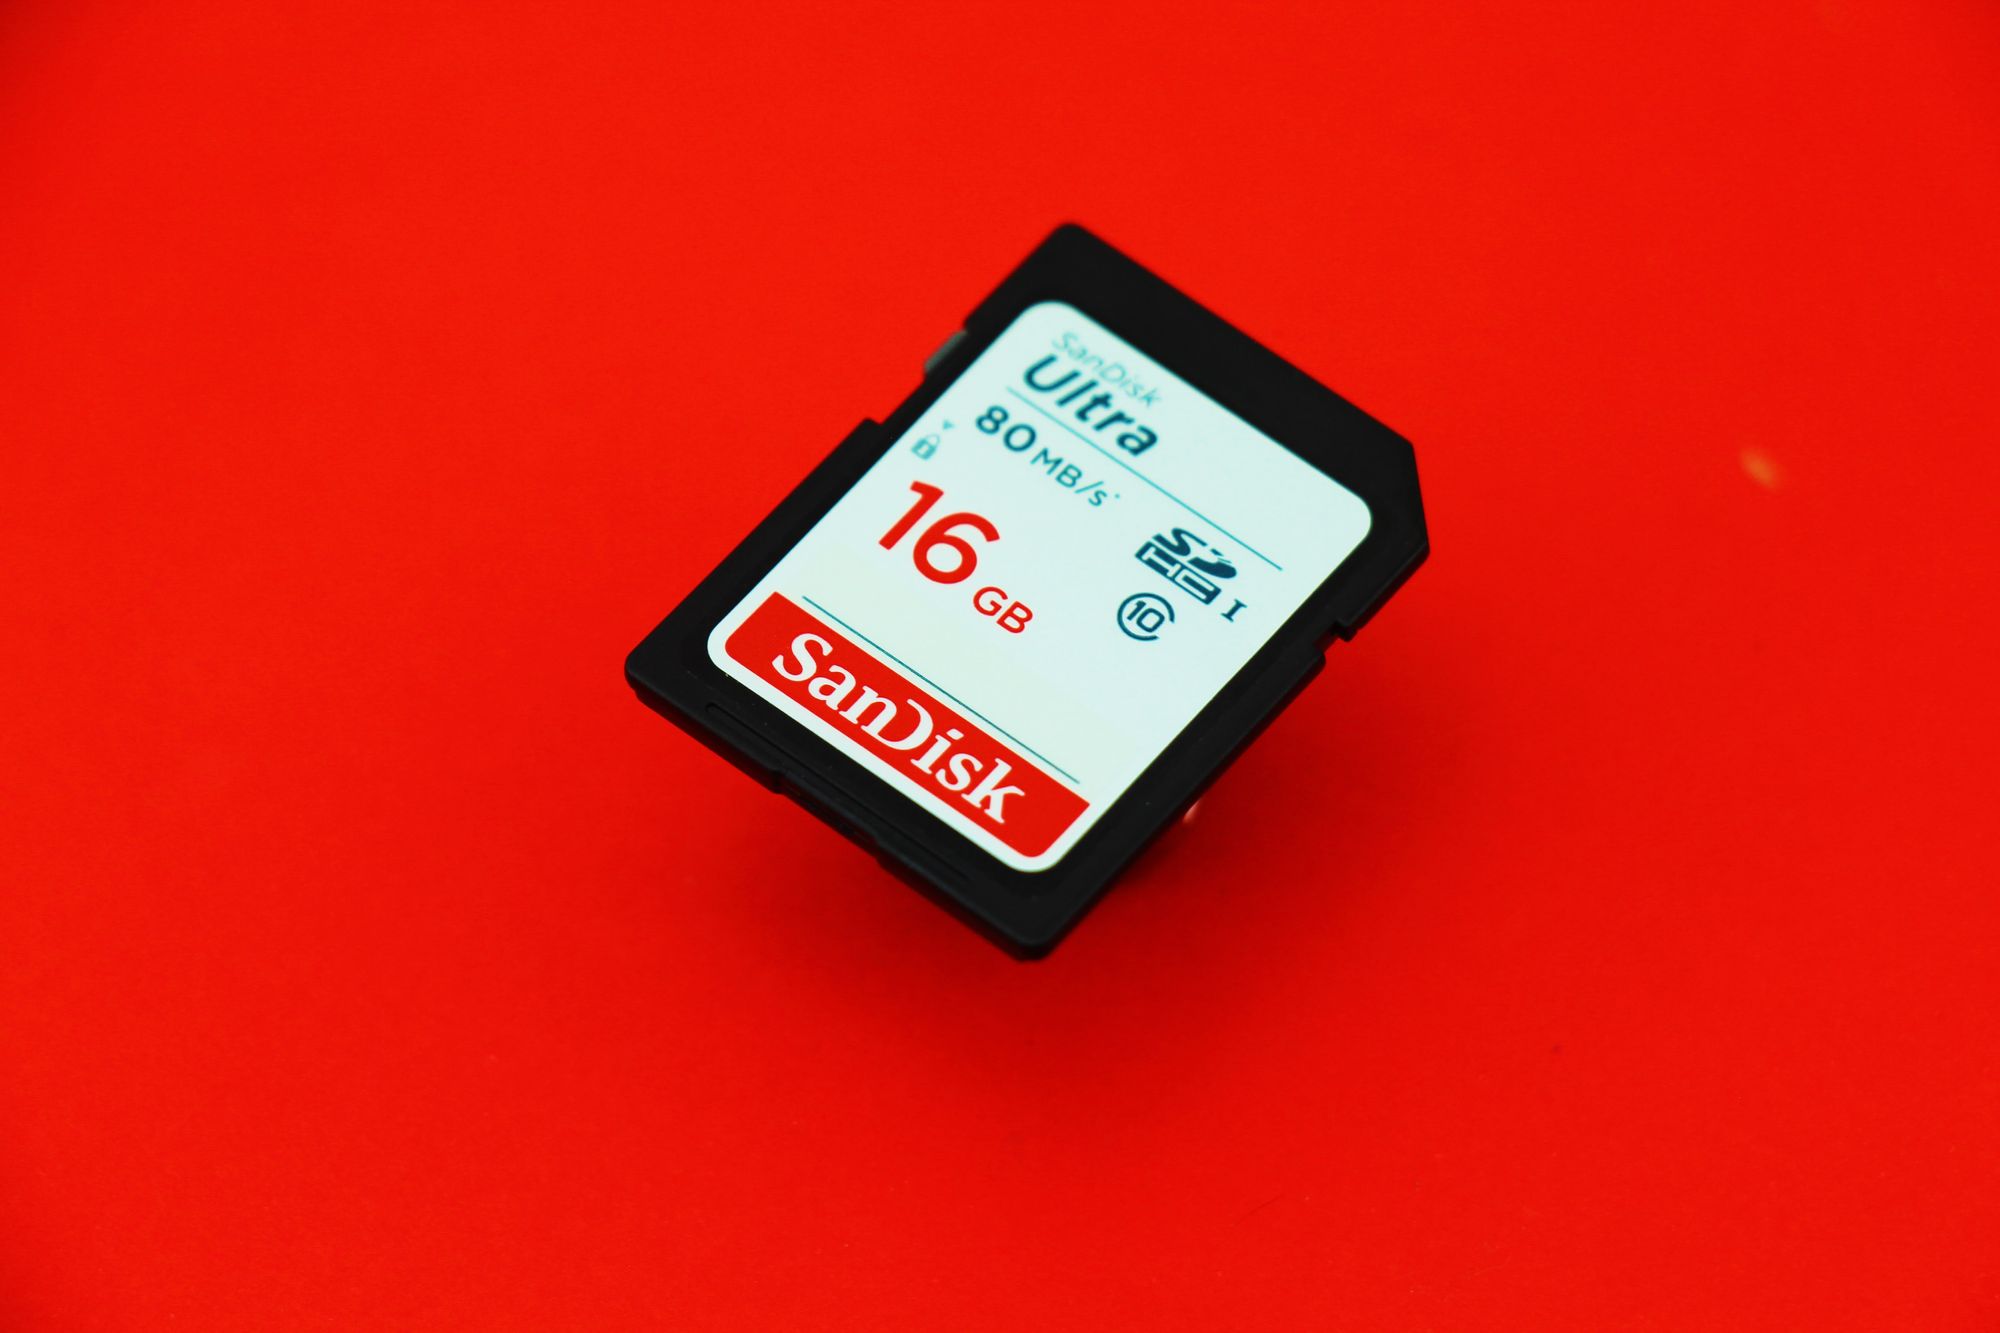 16GB SD card on a red background.